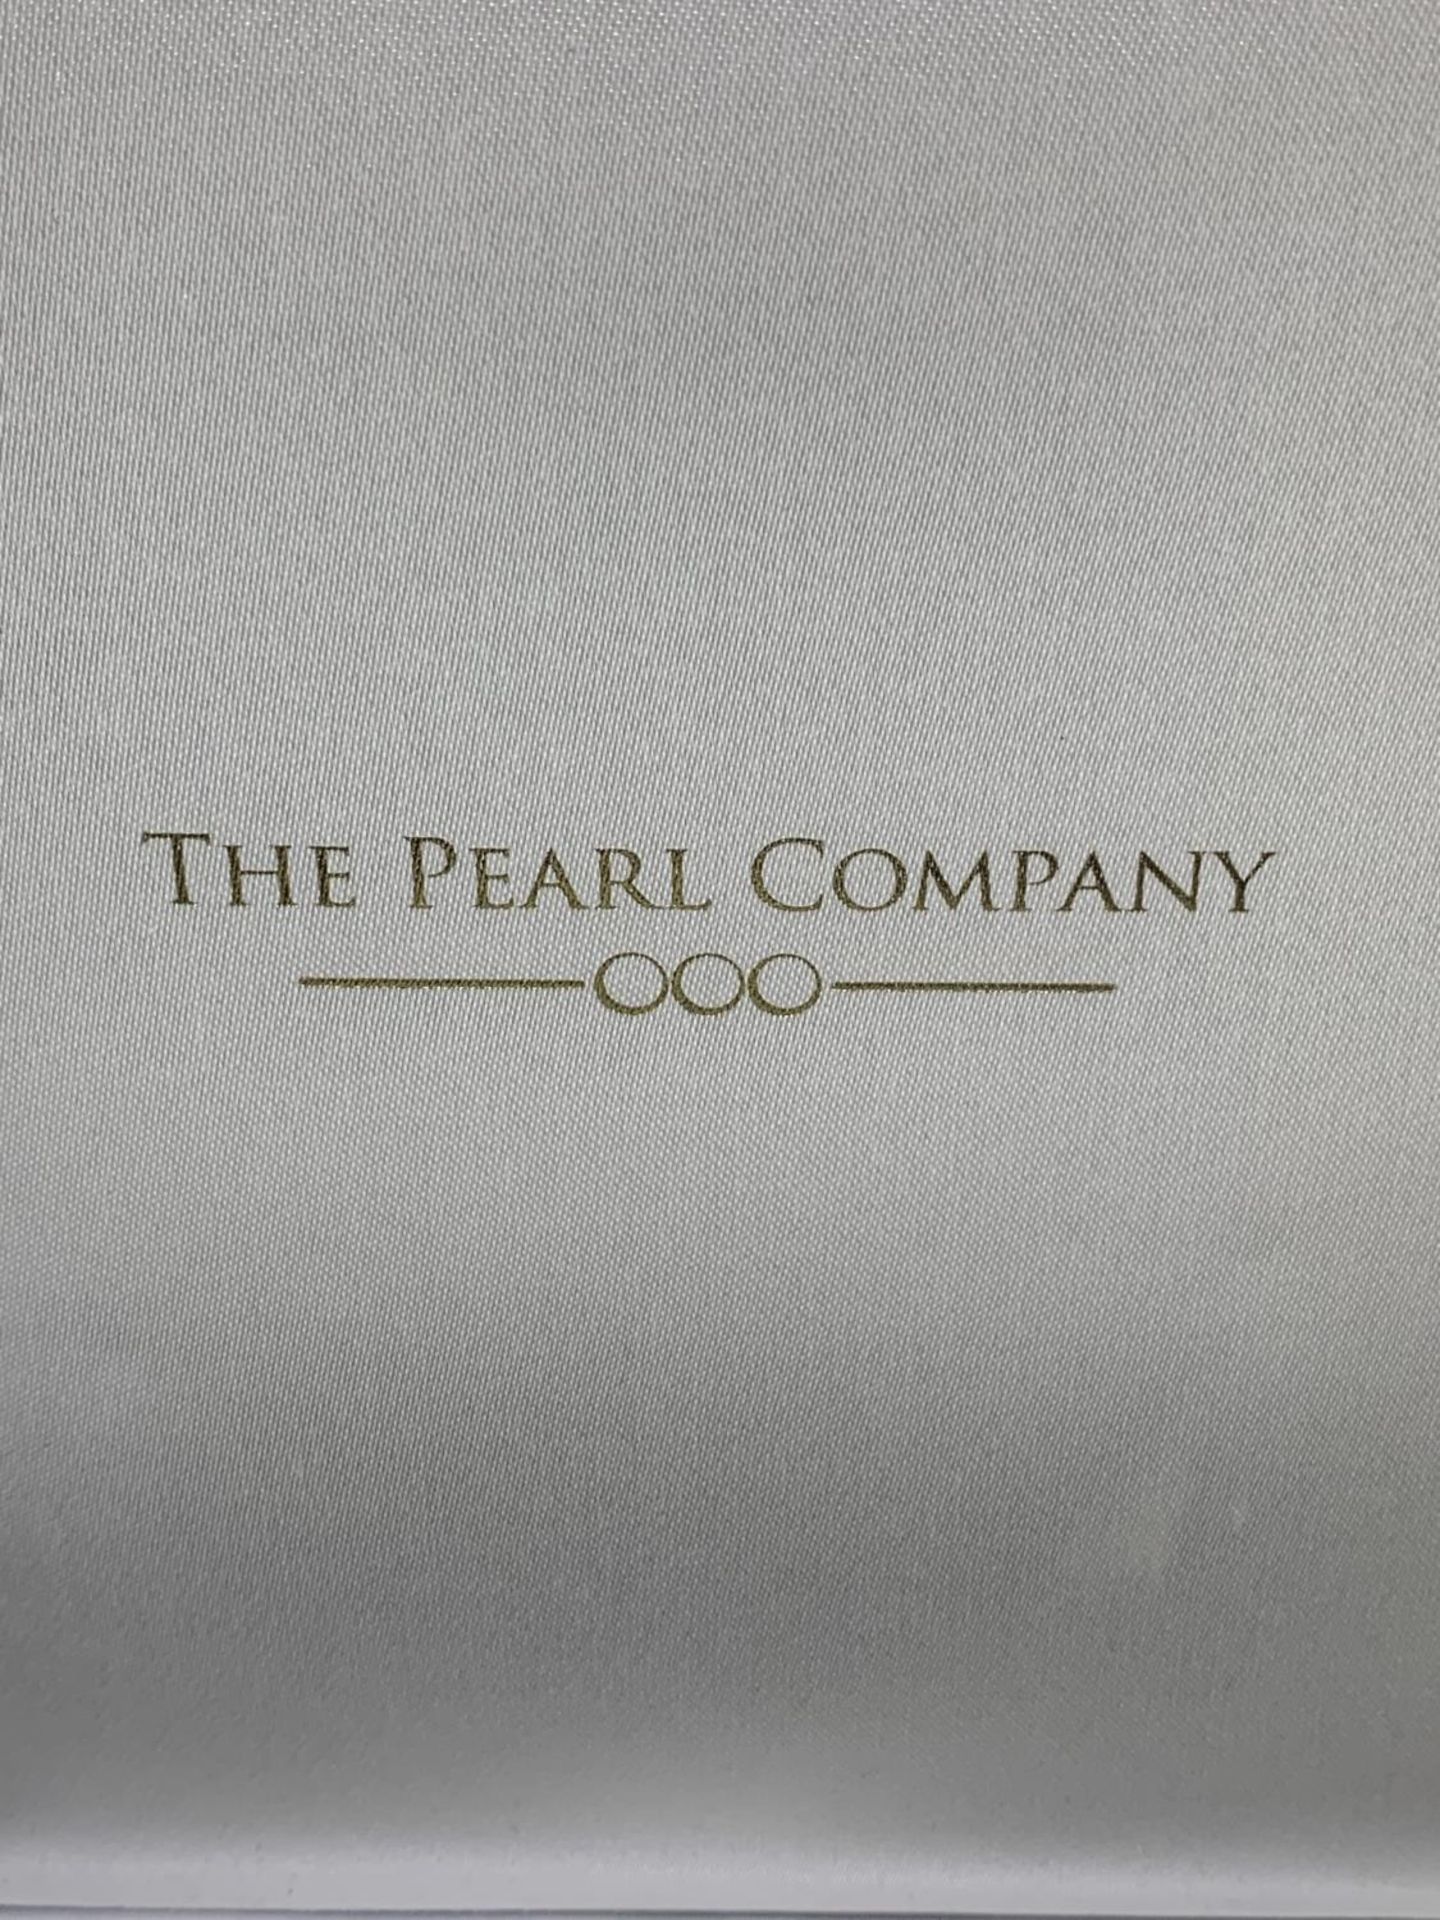 A HEAVY 'THE PEARL COMPANY' NECKLACE IN A PRESENTATION BOX - Image 4 of 5